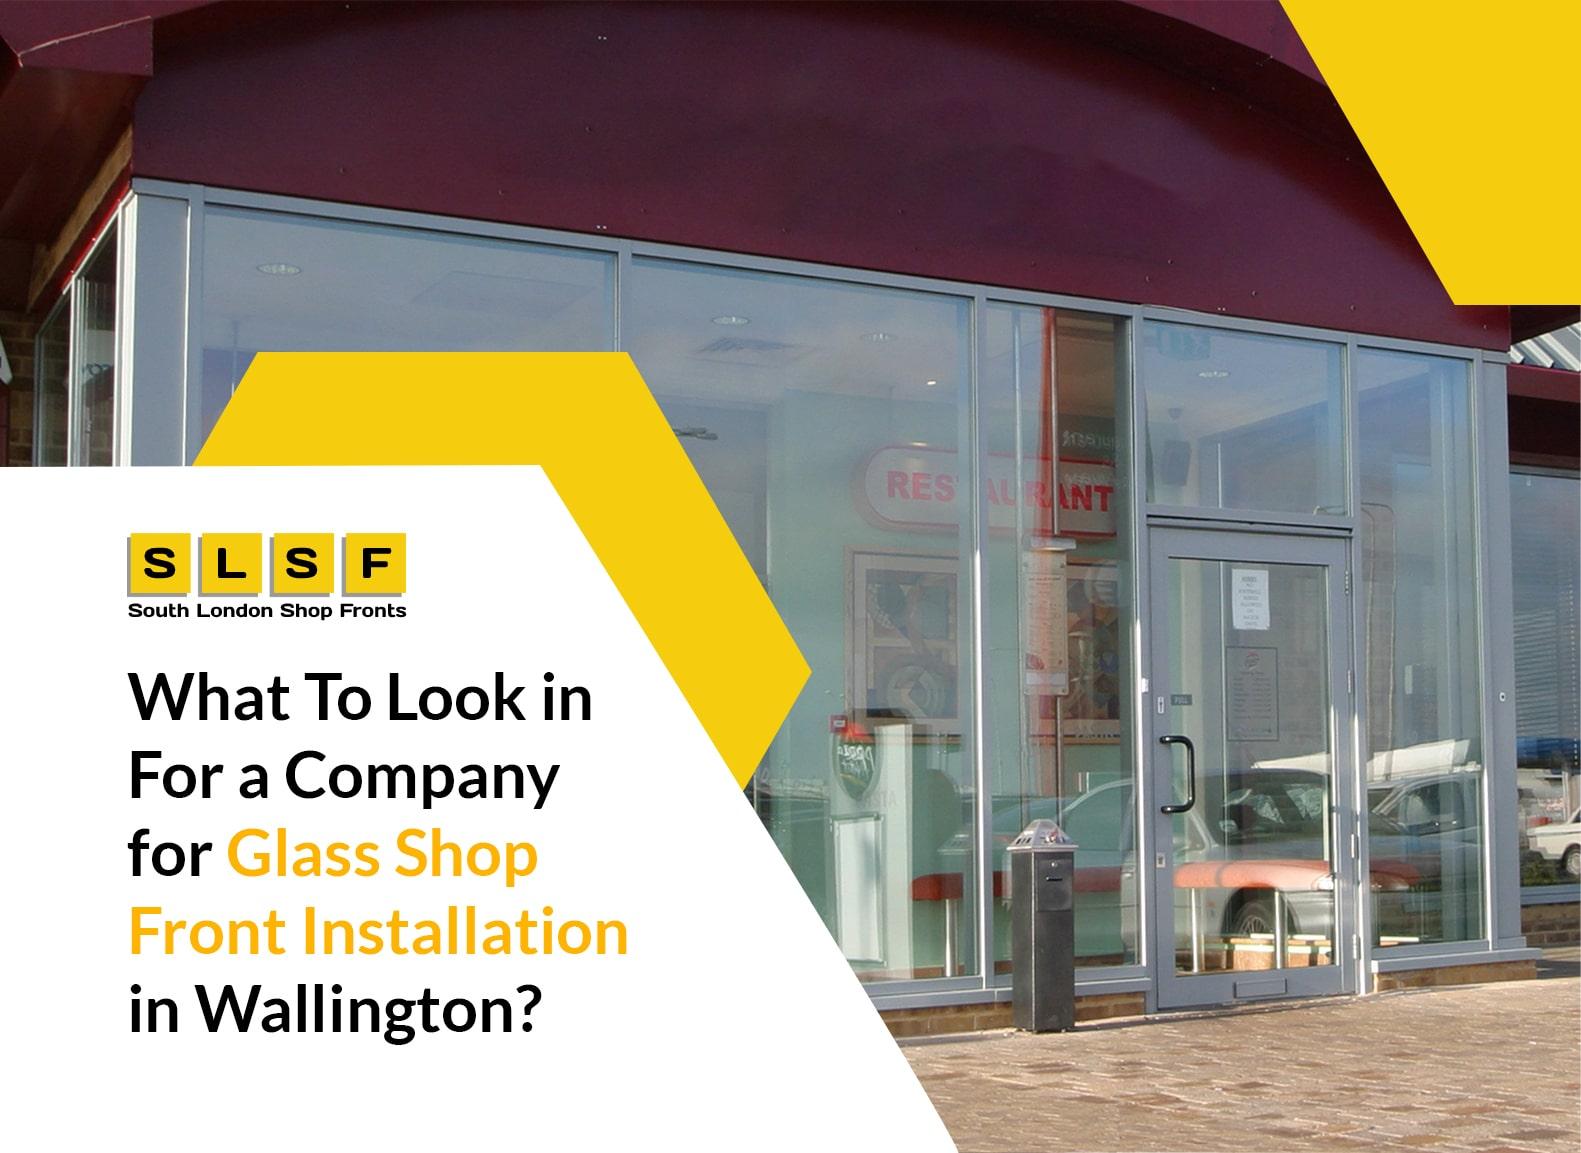 Glass shop front installation in Wallington